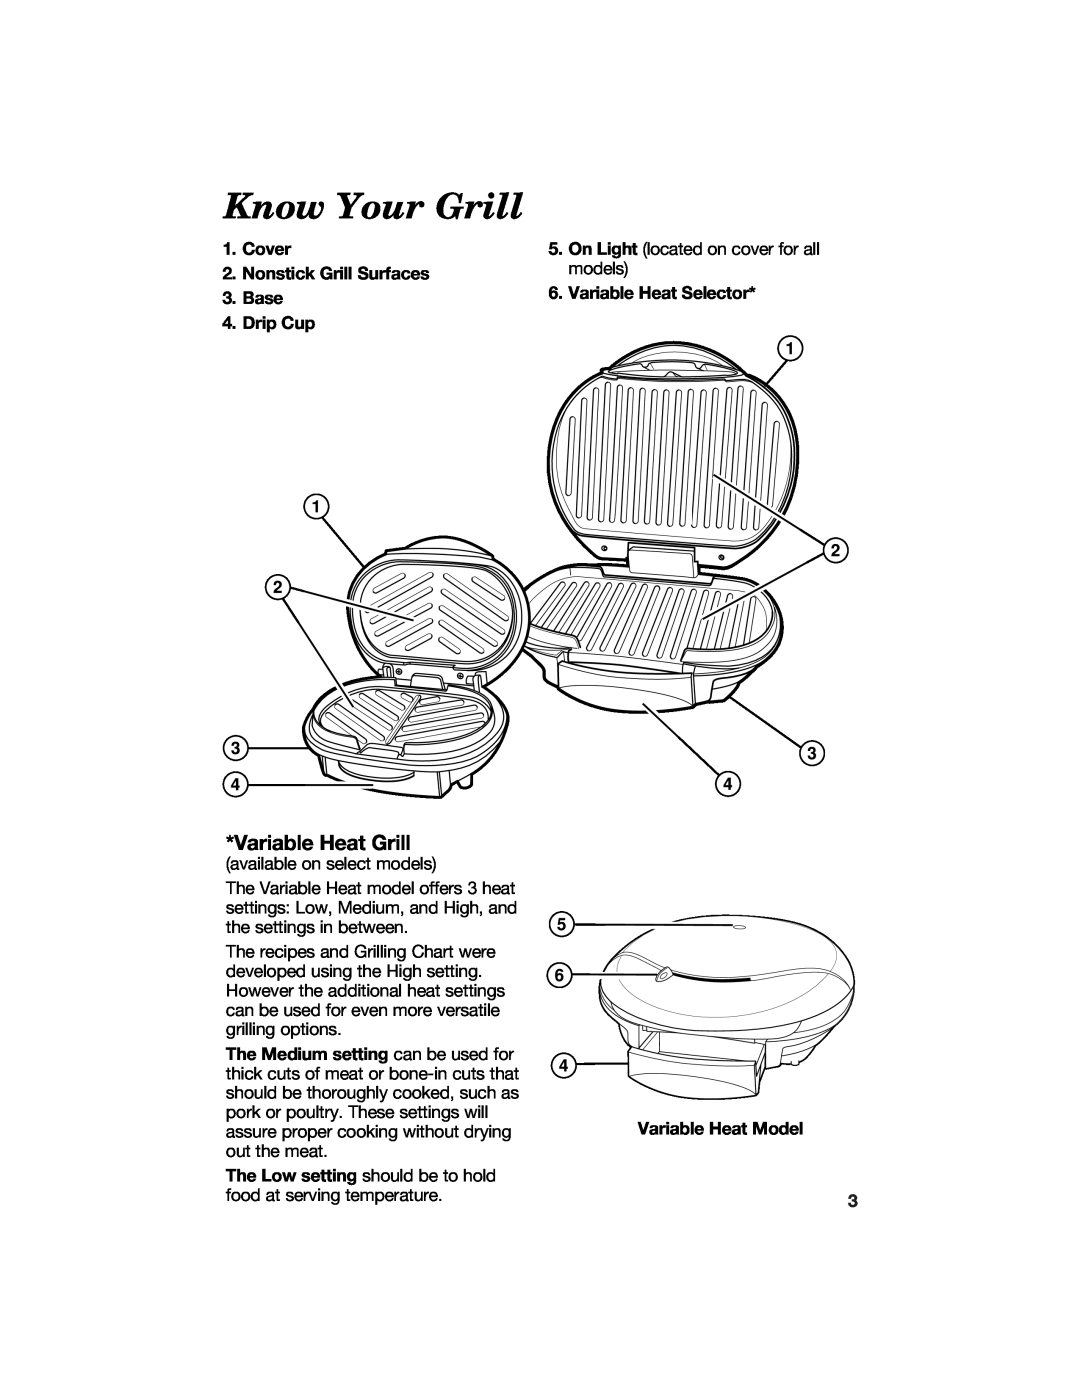 Hamilton Beach 840092400 manual Know Your Grill, Variable Heat Grill, Cover 2.Nonstick Grill Surfaces 3.Base, Drip Cup 